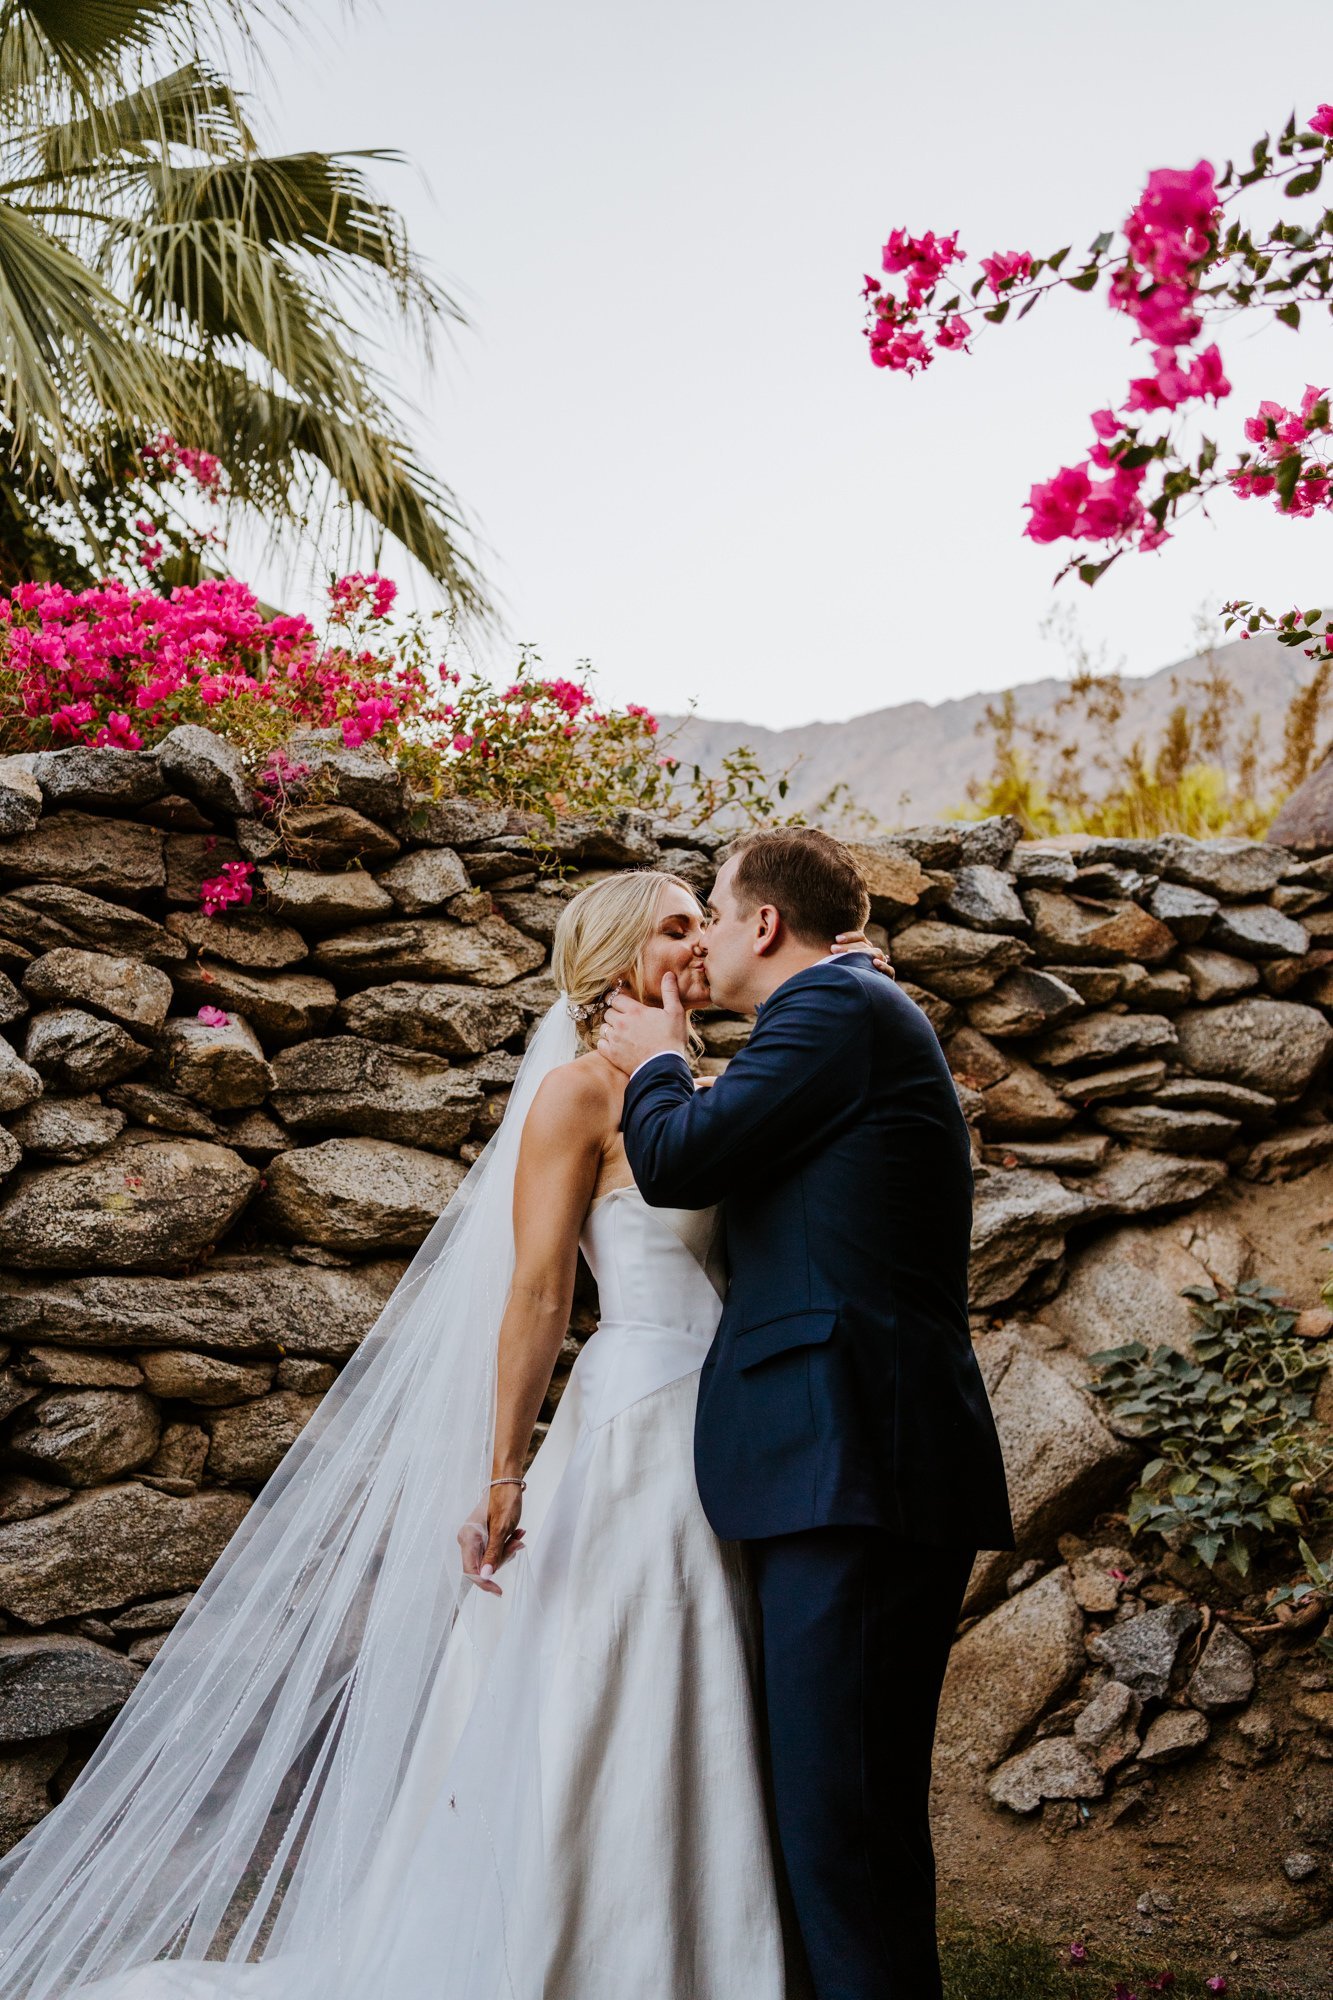 odonnell house palm springs wedding tida svy photography-63.jpg